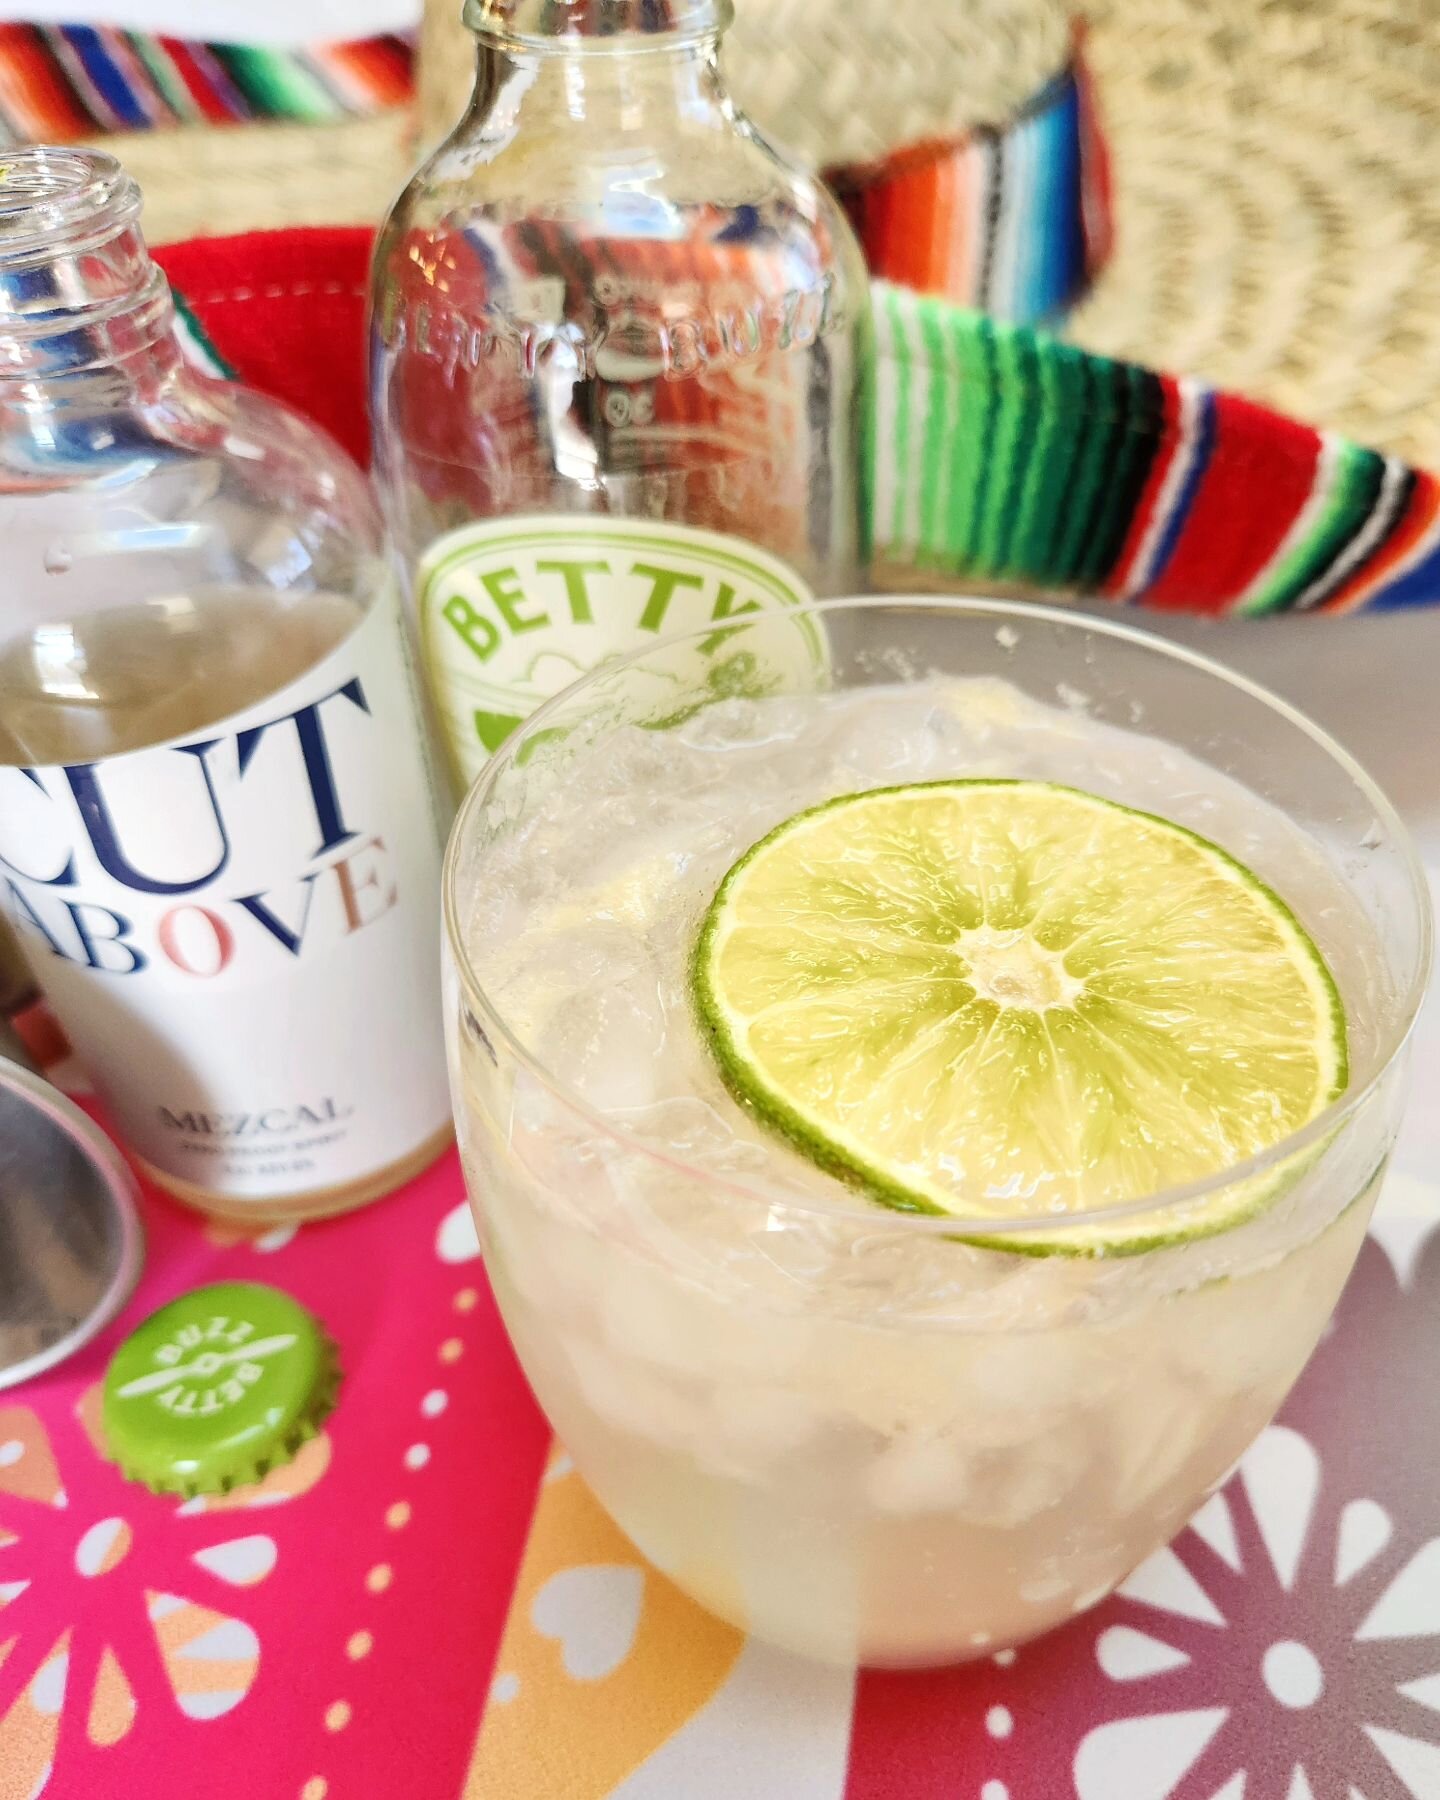 Sip into Refreshment with this Zero Proof Margarita! 🍋✨

Crafted with love using Betty Buzz lemon lime non-alcoholic homemade sparkling beverages, A Cut Above 0% abv mezcal, and a splash of fresh lime juice.

🌿🍹 Embrace the bold flavors, minus the